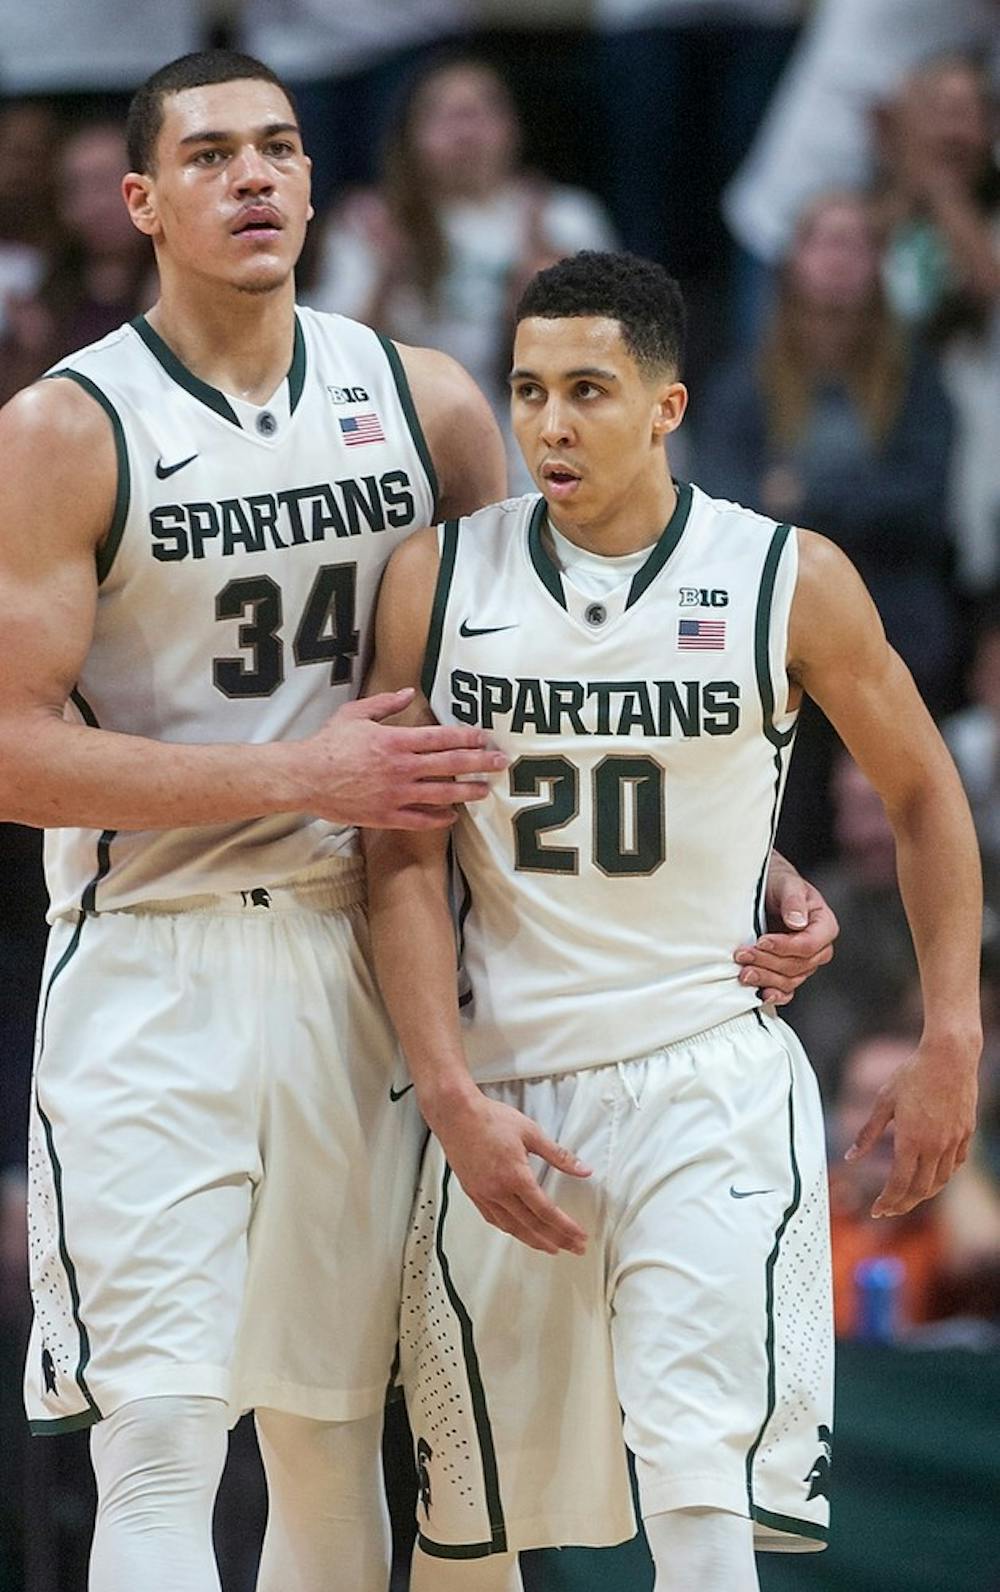 <p>Sophomore forward Gavin Schilling consoles senior guard Travis Trice after a foul call Jan. 11, 2015, during the game against Northwestern at Breslin Center. The Spartans defeated the Wildcats, 84-77 in overtime. Kelsey Feldpausch/The State News.</p>